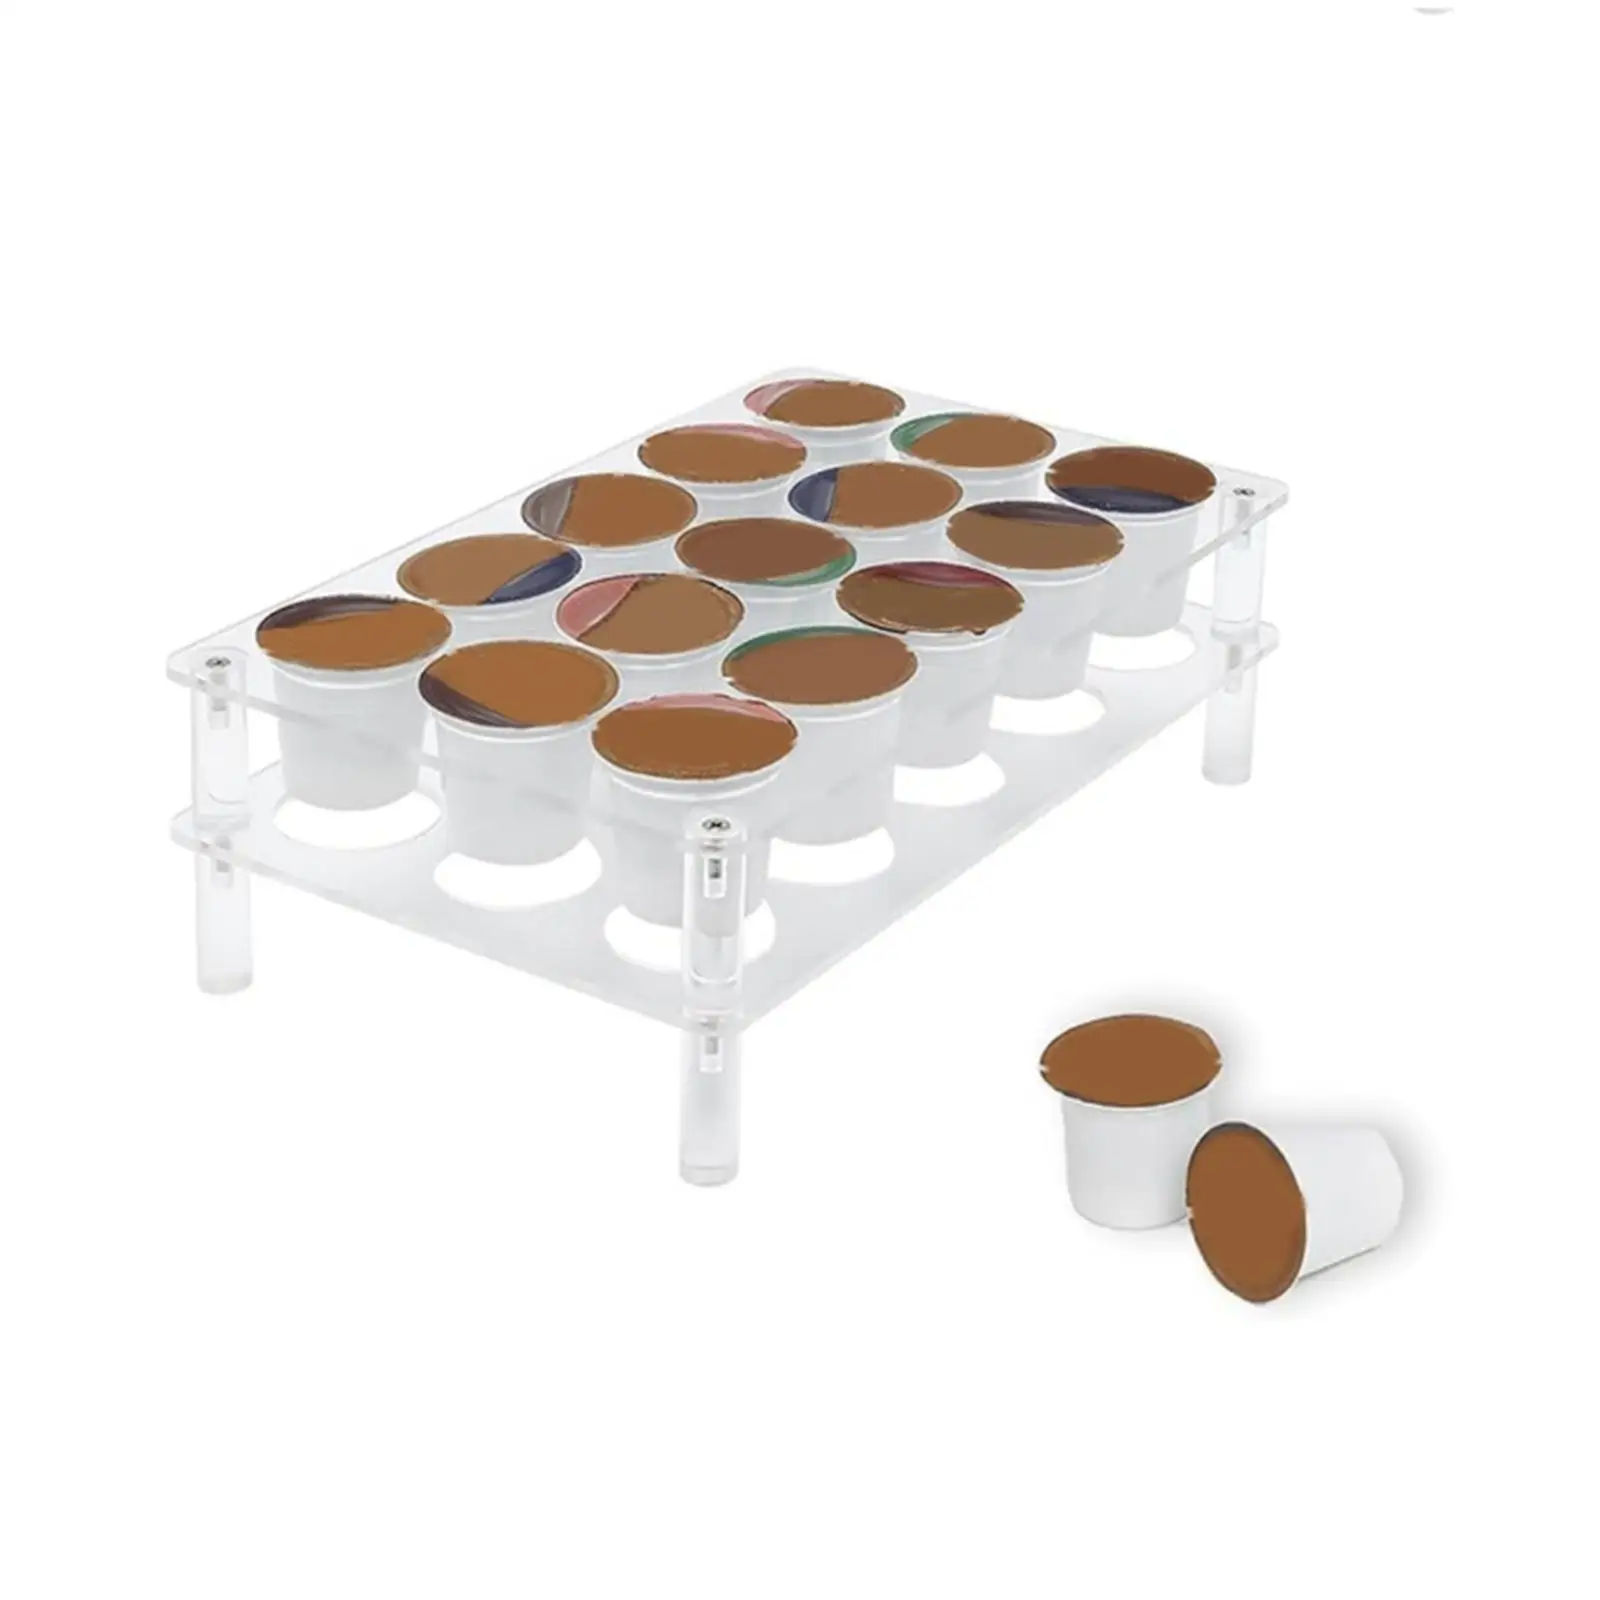 2 Pieces Coffee Pod Organizer Organizer Drawer Insert Flat Countertop for Birthday Party Cup Holder Countertop Acrylic Pod Tray